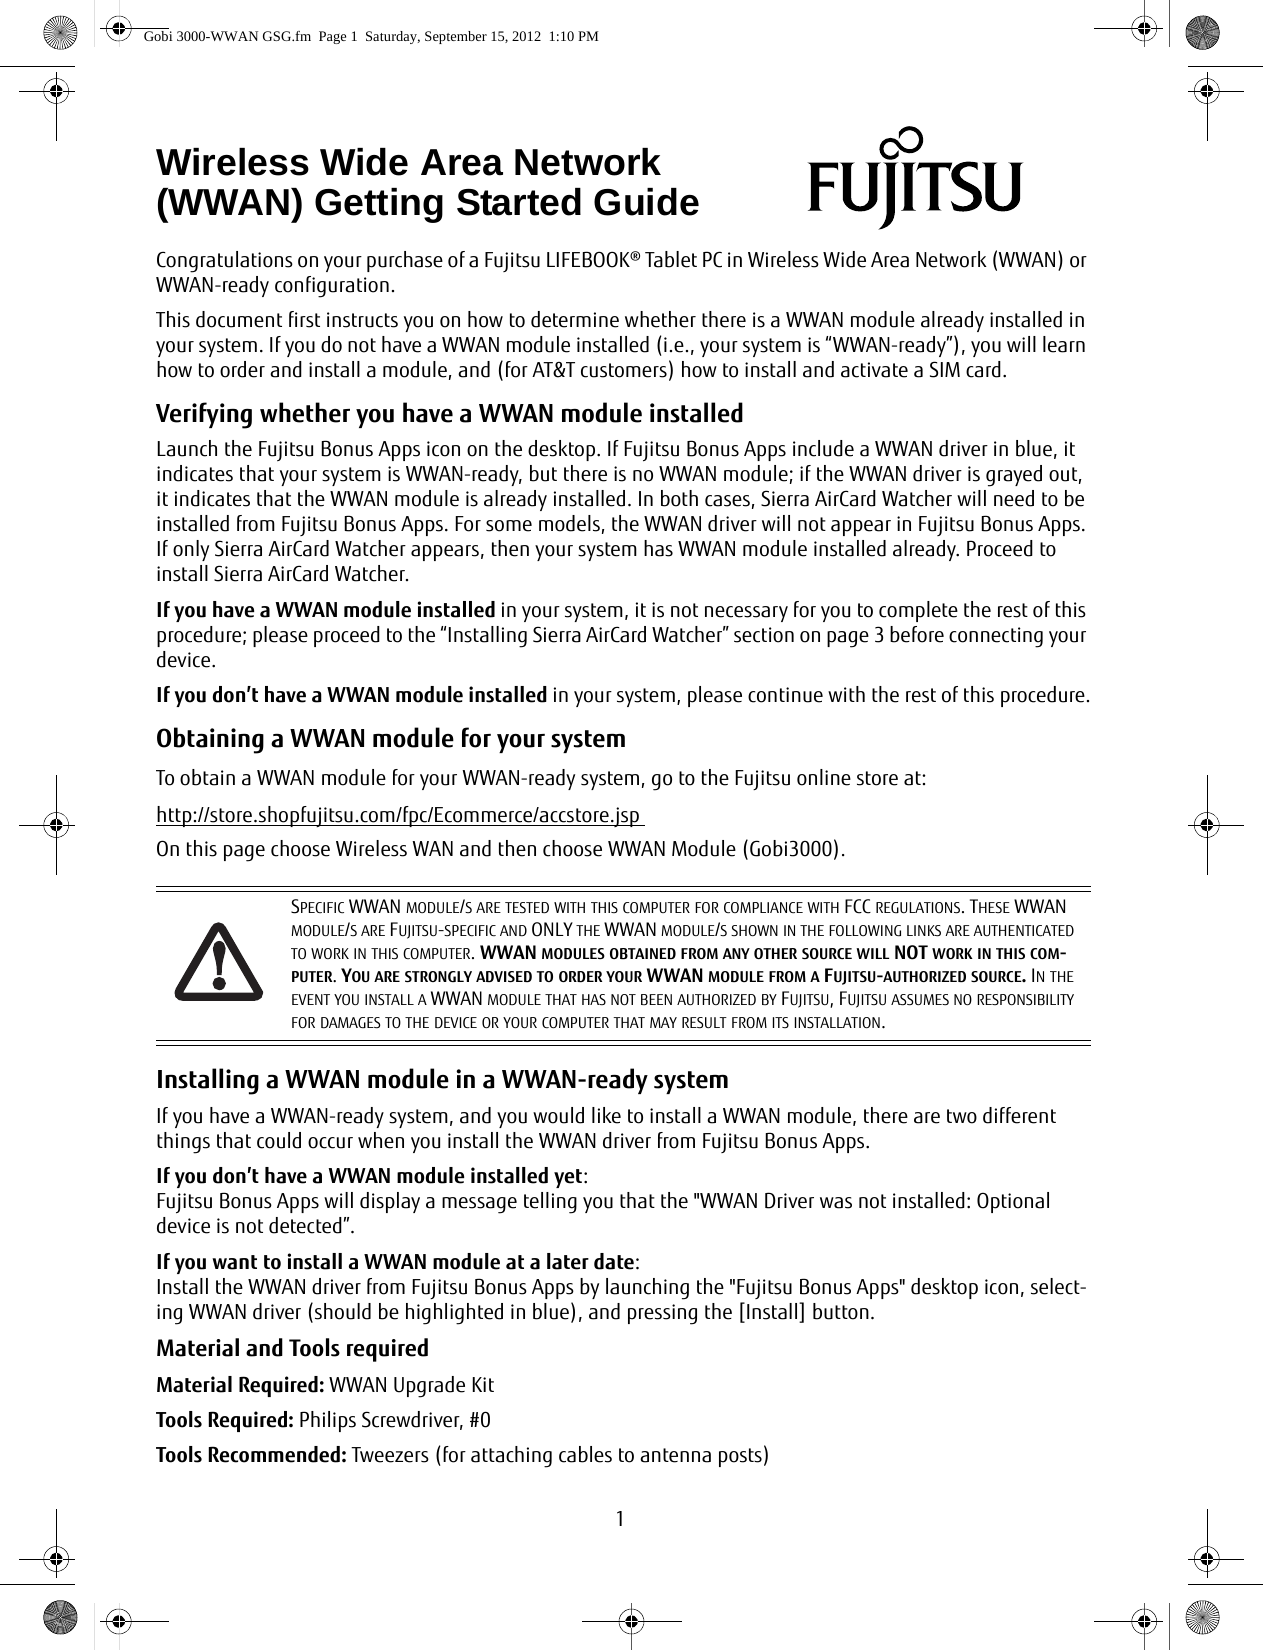 1Congratulations on your purchase of a Fujitsu LIFEBOOK® Tablet PC in Wireless Wide Area Network (WWAN) or WWAN-ready configuration. This document first instructs you on how to determine whether there is a WWAN module already installed in your system. If you do not have a WWAN module installed (i.e., your system is “WWAN-ready”), you will learn how to order and install a module, and (for AT&amp;T customers) how to install and activate a SIM card.Verifying whether you have a WWAN module installedLaunch the Fujitsu Bonus Apps icon on the desktop. If Fujitsu Bonus Apps include a WWAN driver in blue, it indicates that your system is WWAN-ready, but there is no WWAN module; if the WWAN driver is grayed out, it indicates that the WWAN module is already installed. In both cases, Sierra AirCard Watcher will need to be installed from Fujitsu Bonus Apps. For some models, the WWAN driver will not appear in Fujitsu Bonus Apps. If only Sierra AirCard Watcher appears, then your system has WWAN module installed already. Proceed to install Sierra AirCard Watcher.If you have a WWAN module installed in your system, it is not necessary for you to complete the rest of this procedure; please proceed to the “Installing Sierra AirCard Watcher” section on page 3 before connecting your device.If you don’t have a WWAN module installed in your system, please continue with the rest of this procedure.Obtaining a WWAN module for your systemTo obtain a WWAN module for your WWAN-ready system, go to the Fujitsu online store at:http://store.shopfujitsu.com/fpc/Ecommerce/accstore.jsp On this page choose Wireless WAN and then choose WWAN Module (Gobi3000).Installing a WWAN module in a WWAN-ready systemIf you have a WWAN-ready system, and you would like to install a WWAN module, there are two different things that could occur when you install the WWAN driver from Fujitsu Bonus Apps.If you don’t have a WWAN module installed yet: Fujitsu Bonus Apps will display a message telling you that the &quot;WWAN Driver was not installed: Optional device is not detected”.If you want to install a WWAN module at a later date:Install the WWAN driver from Fujitsu Bonus Apps by launching the &quot;Fujitsu Bonus Apps&quot; desktop icon, select-ing WWAN driver (should be highlighted in blue), and pressing the [Install] button.Material and Tools requiredMaterial Required: WWAN Upgrade KitTools Required: Philips Screwdriver, #0Tools Recommended: Tweezers (for attaching cables to antenna posts)Wireless Wide Area Network (WWAN) Getting Started GuideSPECIFIC WWAN MODULE/S ARE TESTED WITH THIS COMPUTER FOR COMPLIANCE WITH FCC REGULATIONS. THESE WWAN MODULE/S ARE FUJITSU-SPECIFIC AND ONLY THE WWAN MODULE/S SHOWN IN THE FOLLOWING LINKS ARE AUTHENTICATED TO WORK IN THIS COMPUTER. WWAN MODULES OBTAINED FROM ANY OTHER SOURCE WILL NOT WORK IN THIS COM-PUTER. YOU ARE STRONGLY ADVISED TO ORDER YOUR WWAN MODULE FROM A FUJITSU-AUTHORIZED SOURCE. IN THE EVENT YOU INSTALL A WWAN MODULE THAT HAS NOT BEEN AUTHORIZED BY FUJITSU, FUJITSU ASSUMES NO RESPONSIBILITY FOR DAMAGES TO THE DEVICE OR YOUR COMPUTER THAT MAY RESULT FROM ITS INSTALLATION.Gobi 3000-WWAN GSG.fm  Page 1  Saturday, September 15, 2012  1:10 PM